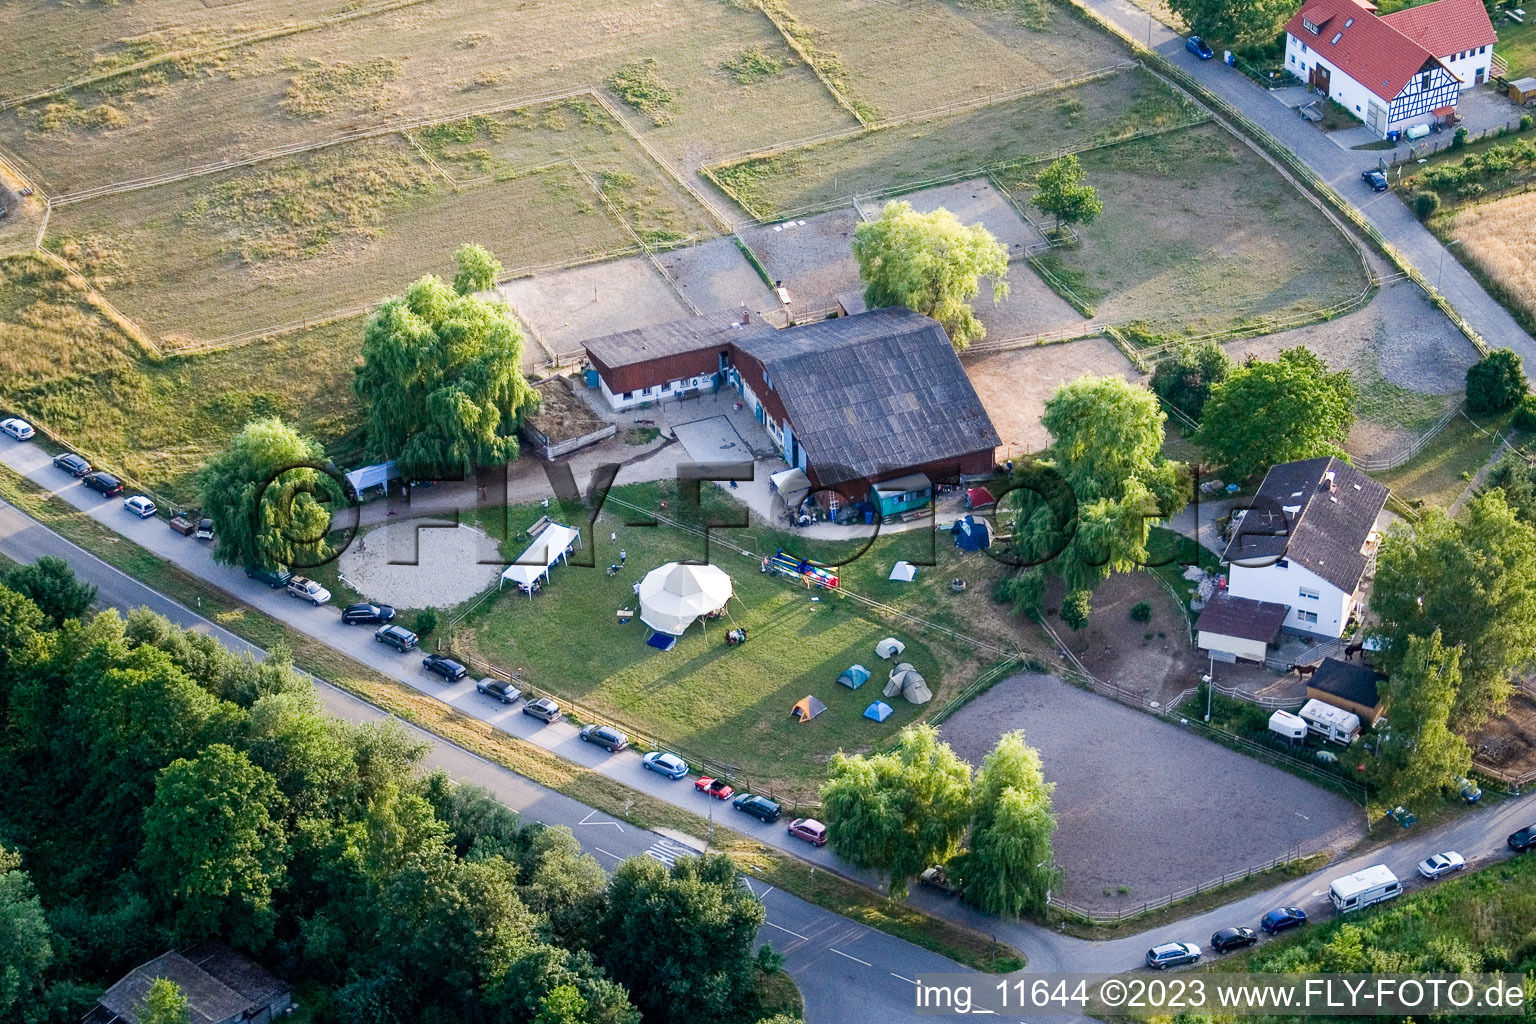 Reithof Trab eV therapeutic riding on Lake Constance in the district Wollmatingen in Konstanz in the state Baden-Wuerttemberg, Germany seen from above